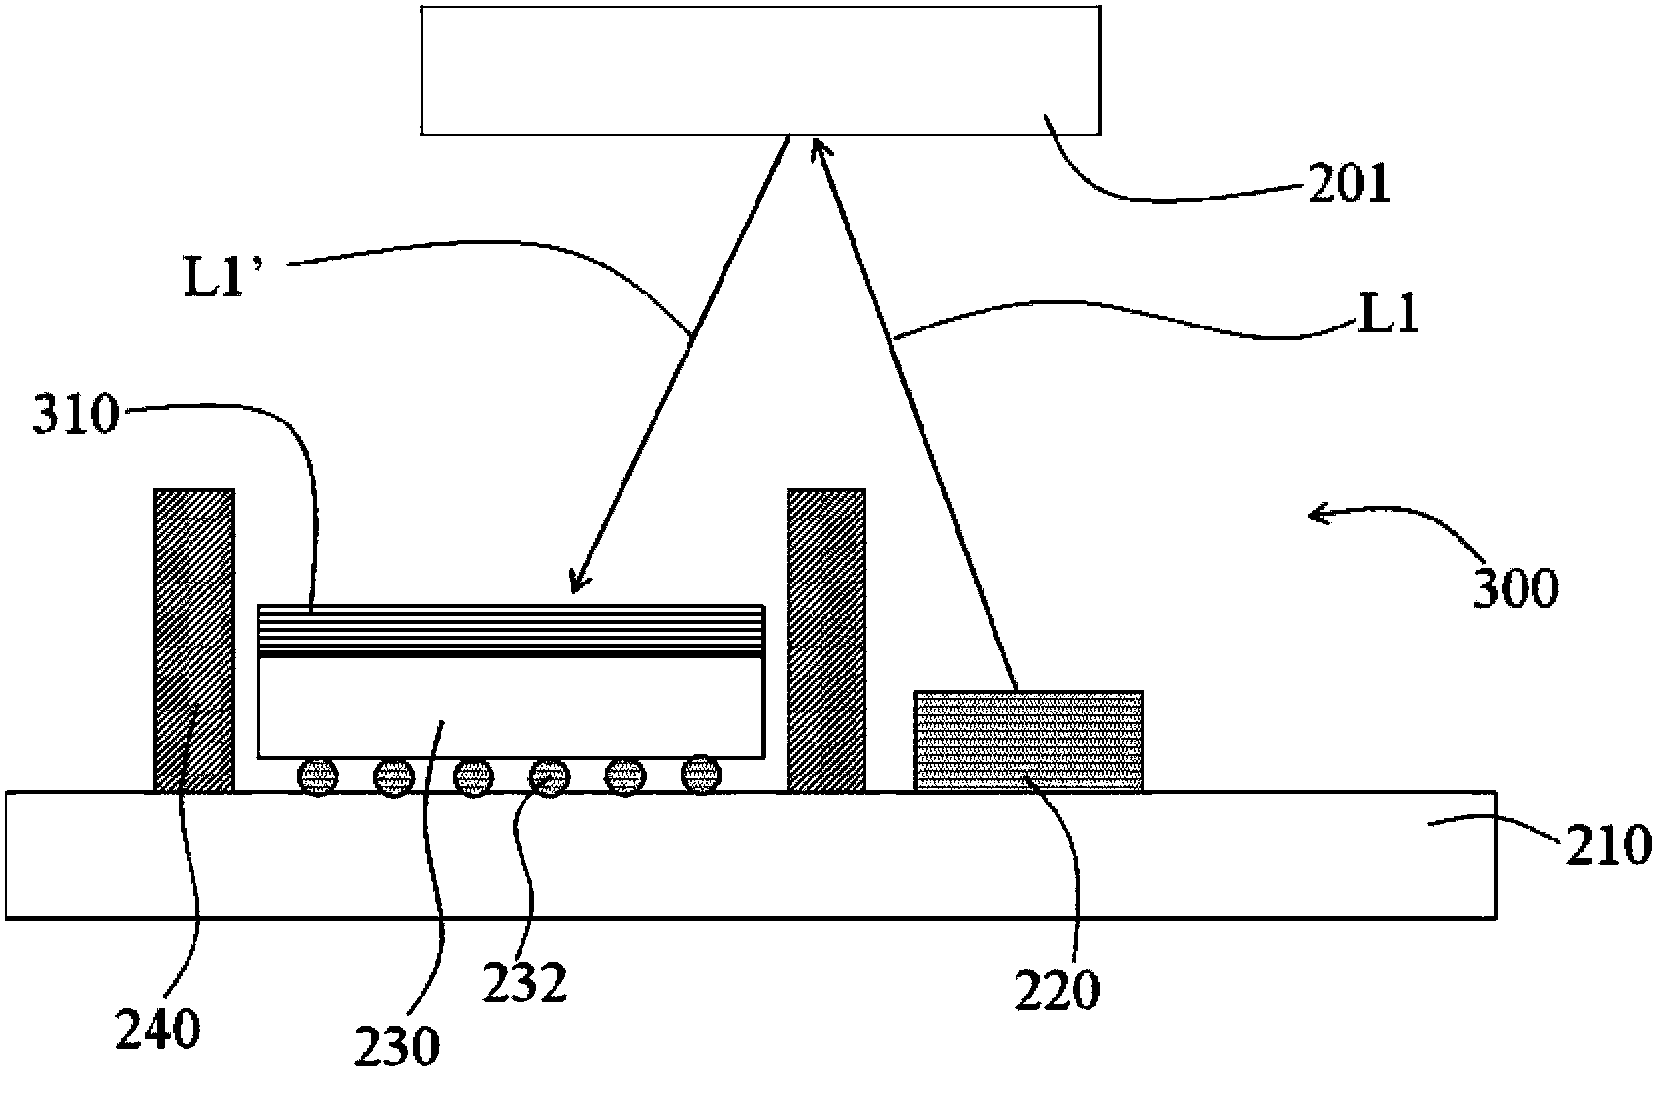 Packaging structure of optical device